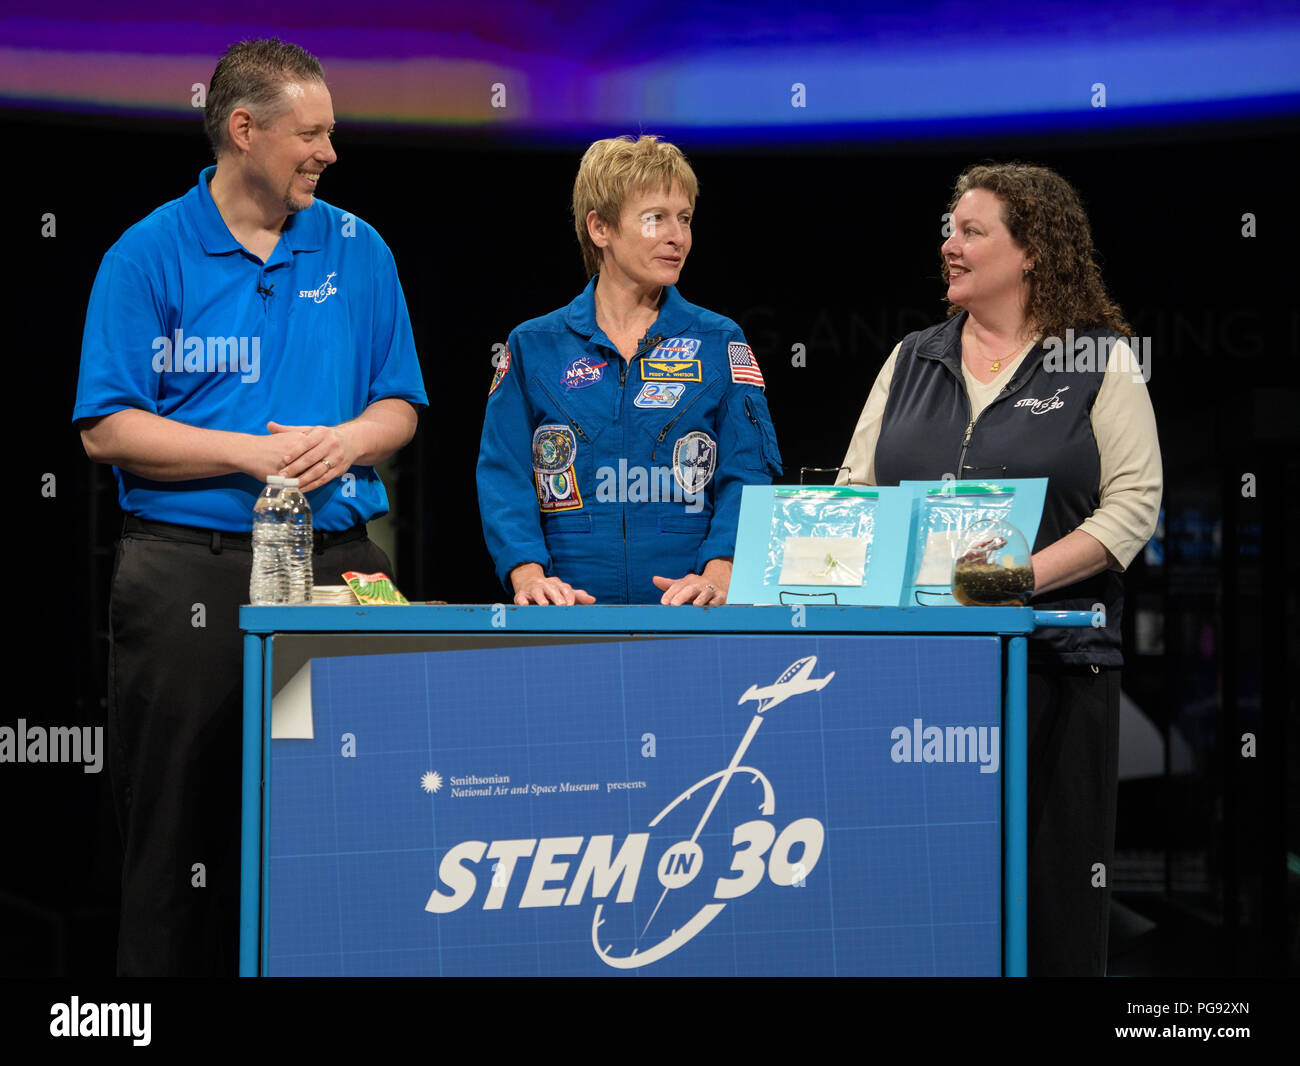 NASA astronaut Peggy Whitson tapes a segment for STEM in 30 with Marty Kelsey, left, and Beth Wilson, Friday, March 2, 2018 at the Smithsonian's National Air and Space Museum in Washington. Whitson spent 288 days onboard the International Space Station as a member of Expedition 50, 51, and 52, conducting four spacewalks and contributing to hundreds of experiments in biology, biotechnology, physical science and Earth science during her stay. Stock Photo